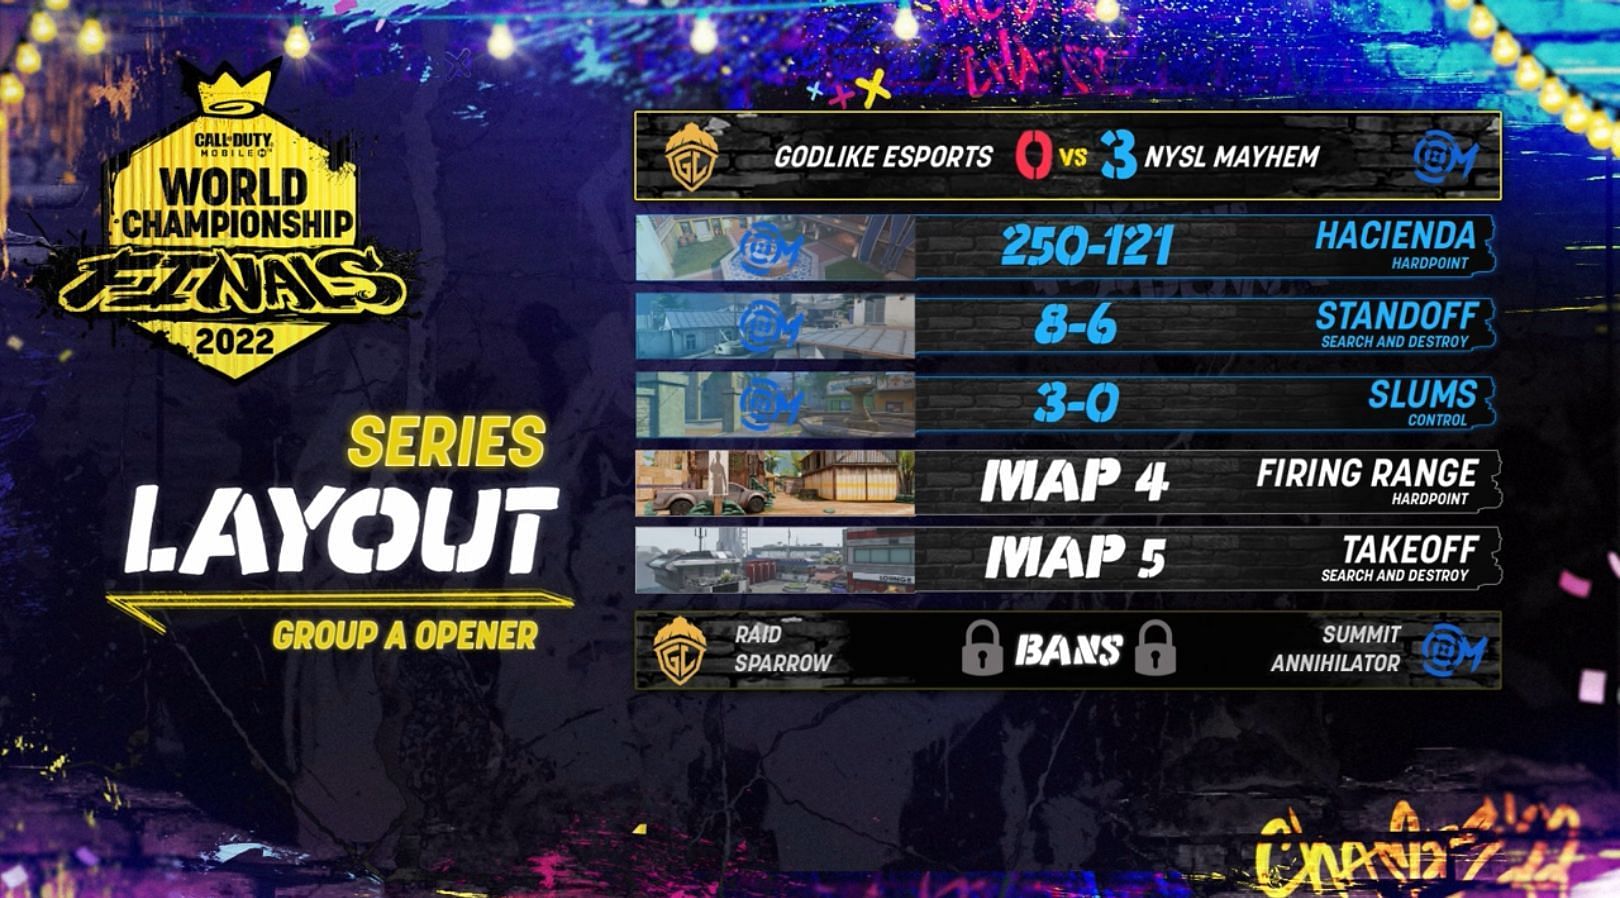 NYSL defeated GodLike in the first match (Image via COD Mobile)